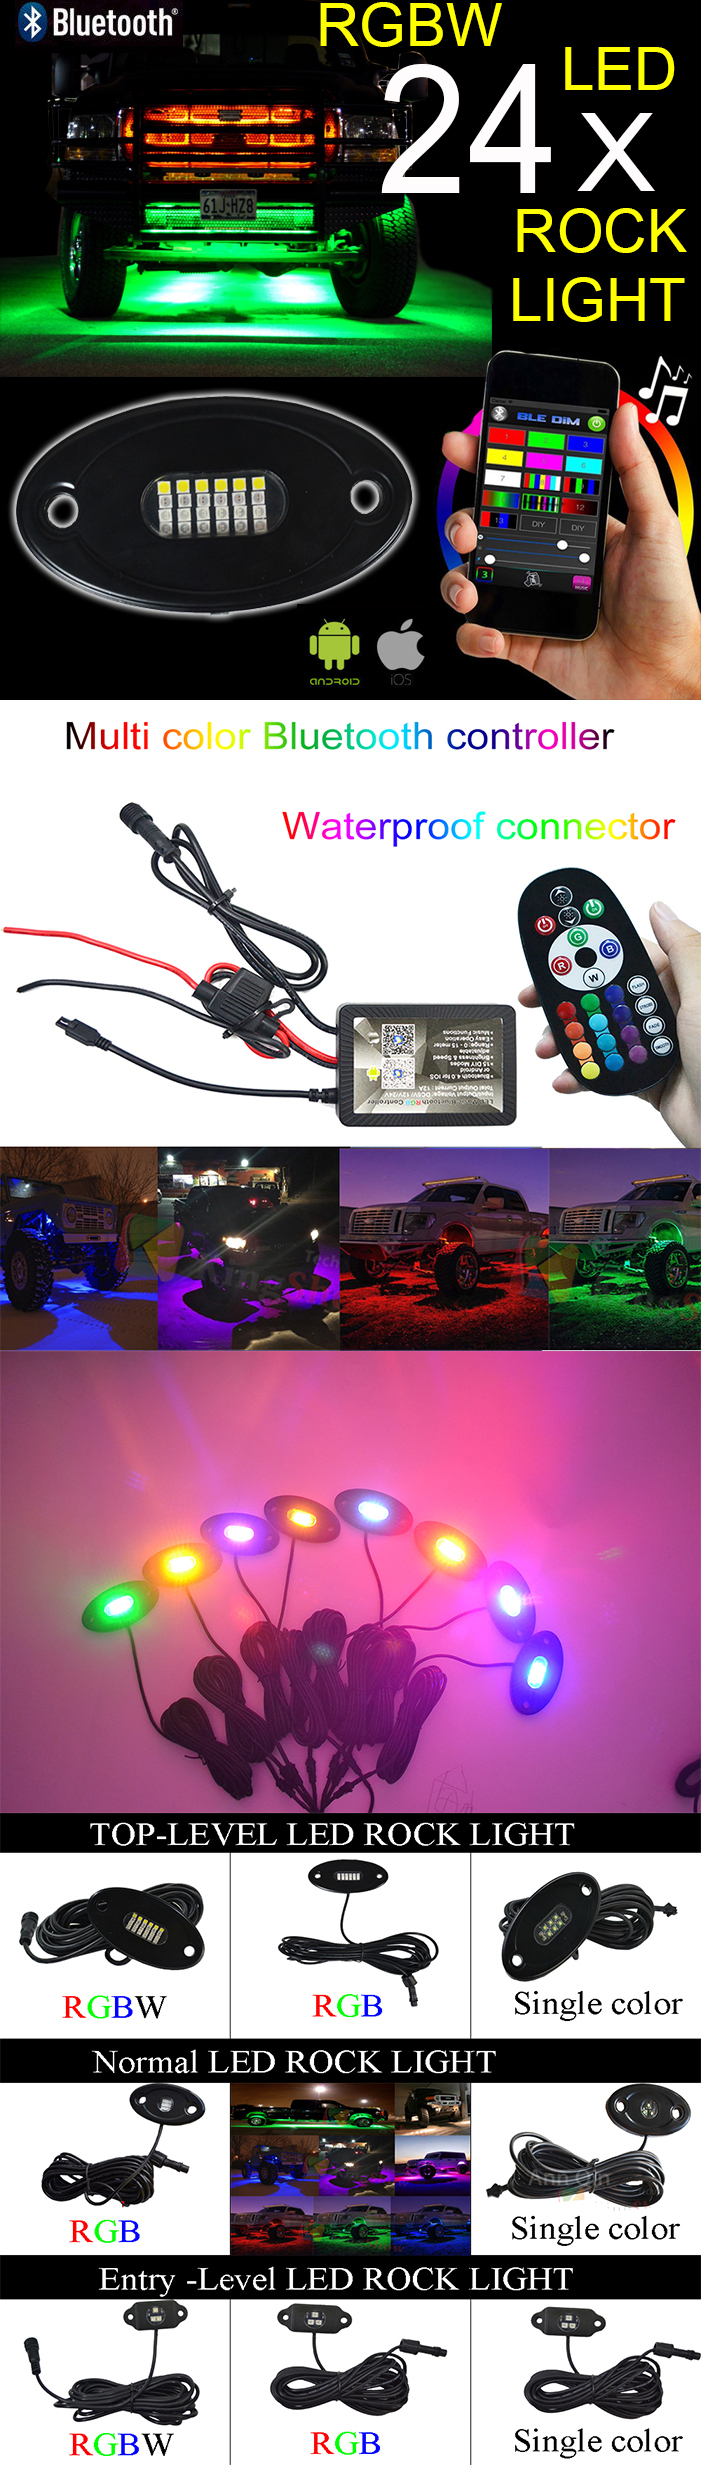 4pcs x Pod Mini Blue-tooth RGBW LED Rock Lights Multi-Function For 4x4 offroad Vehicle For ATV Wrangler